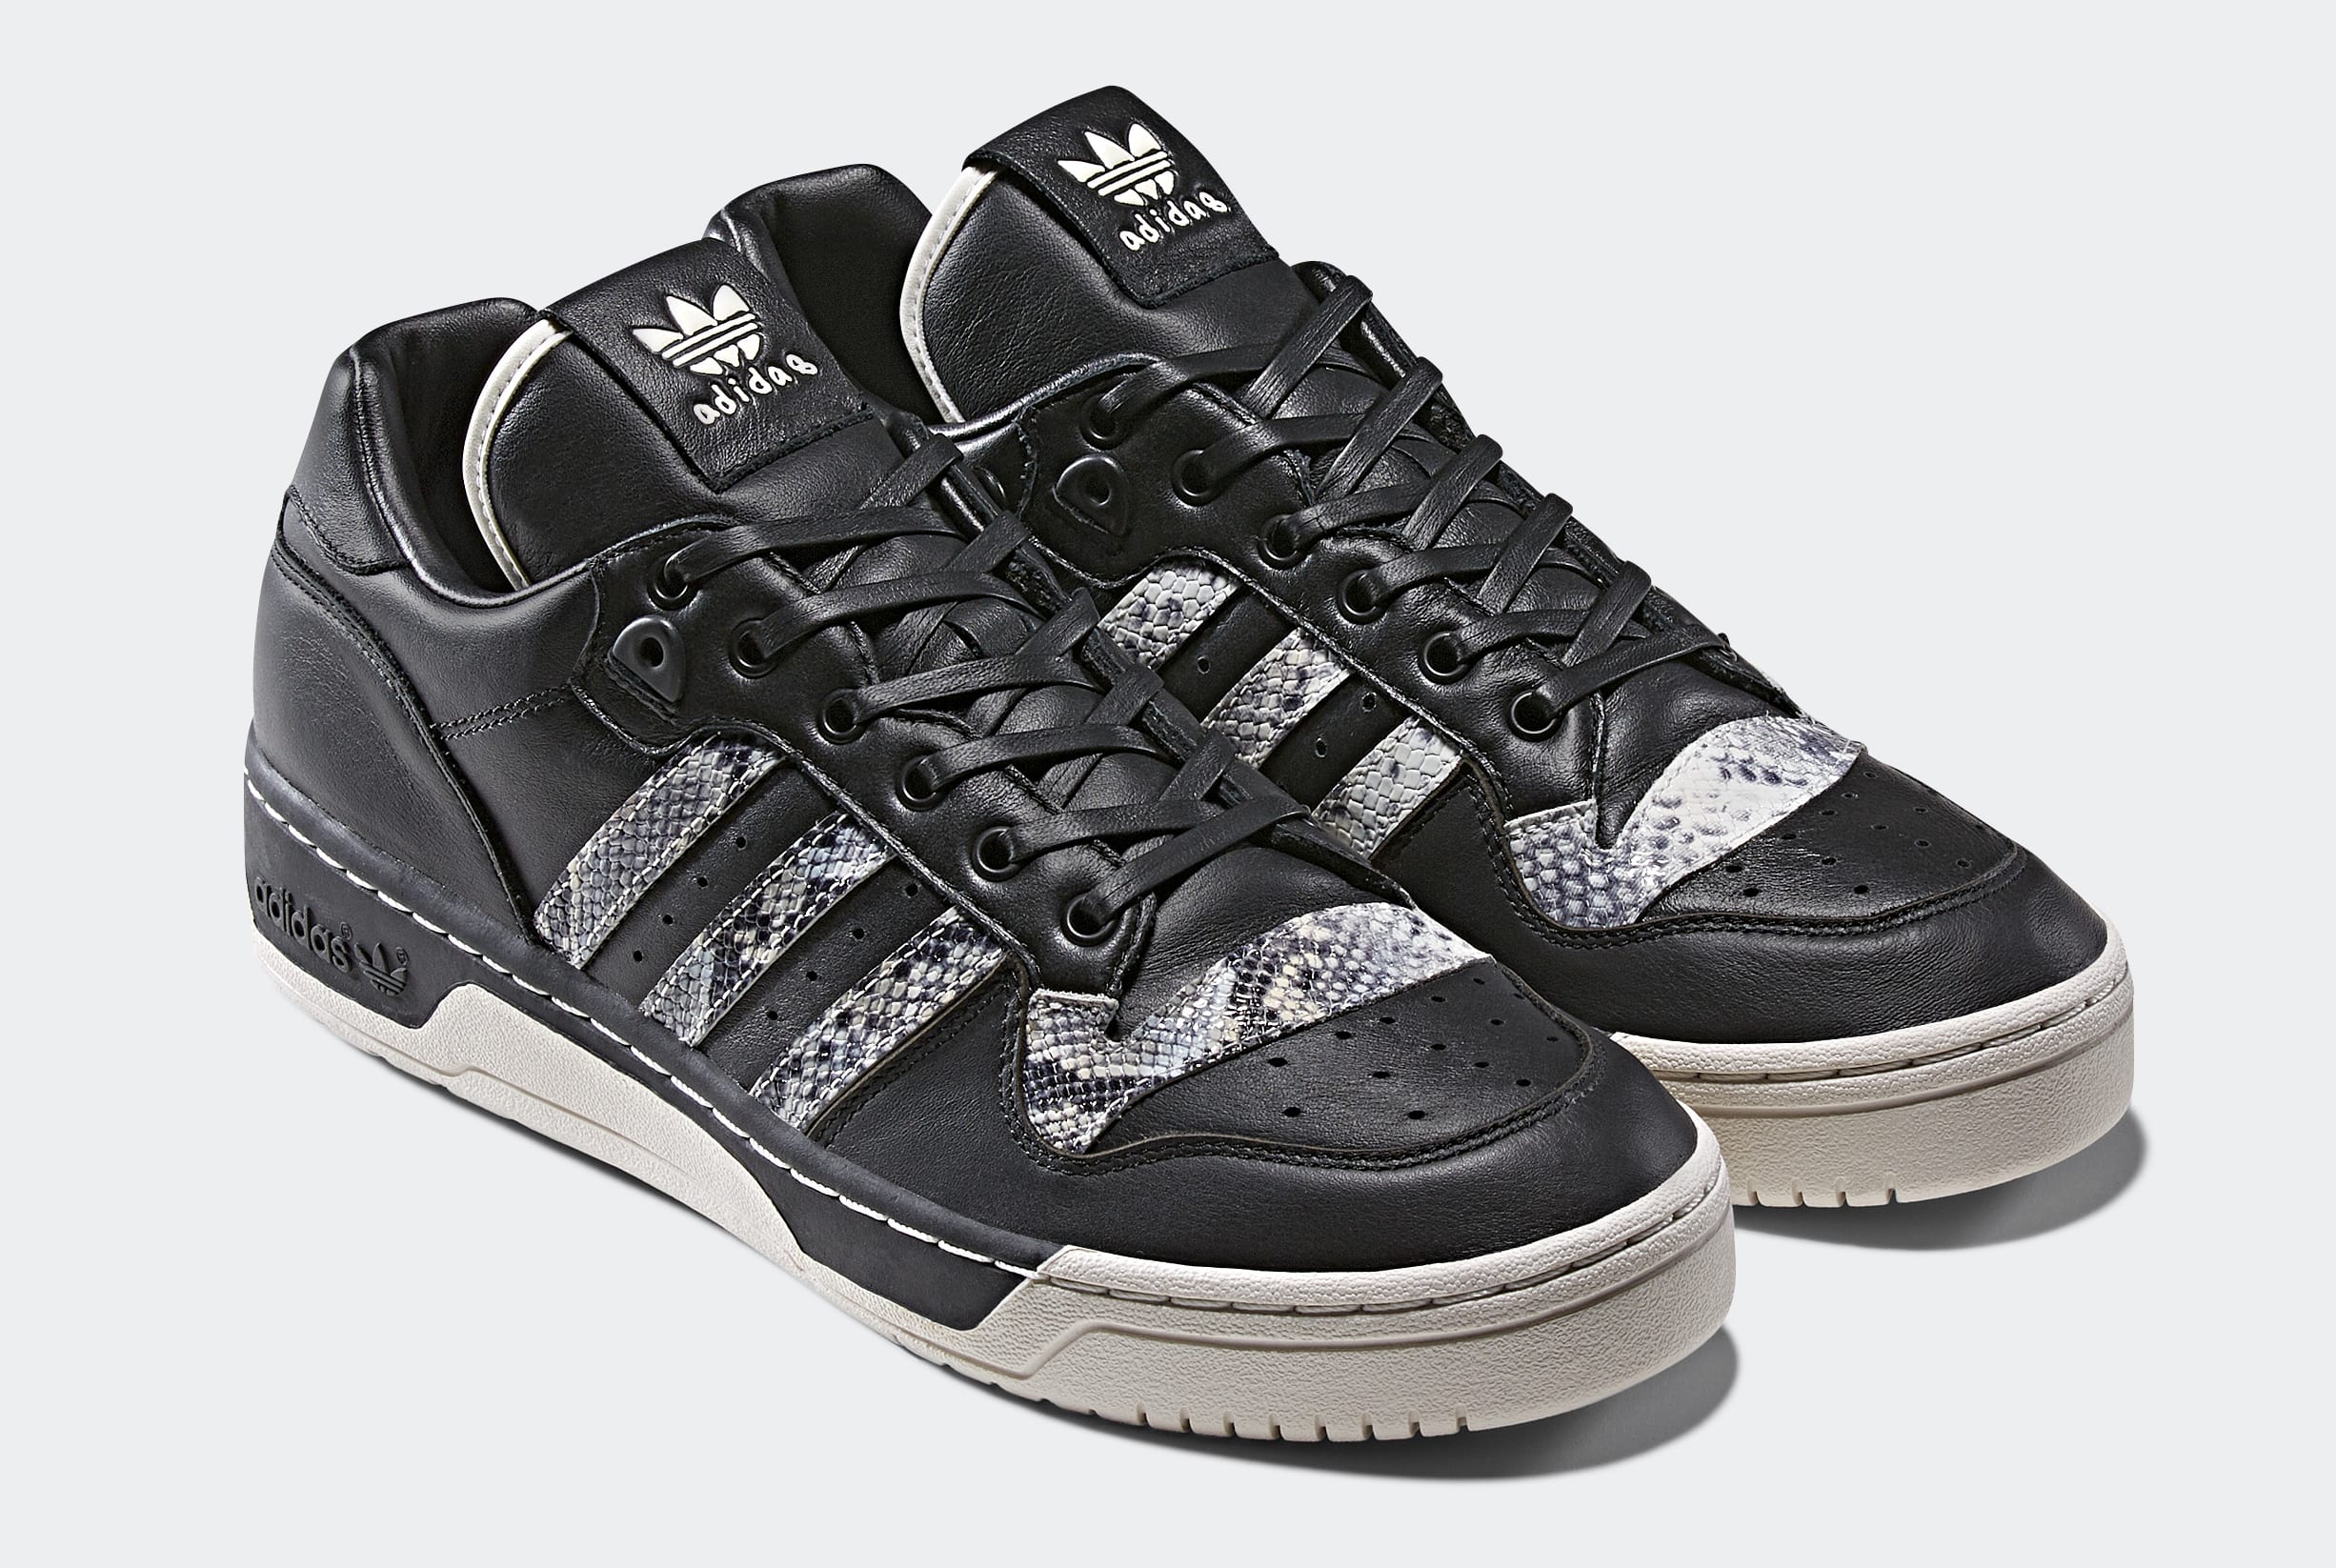 United Arrows and Sons x Adidas Rivalry Low B37112 (Pair)